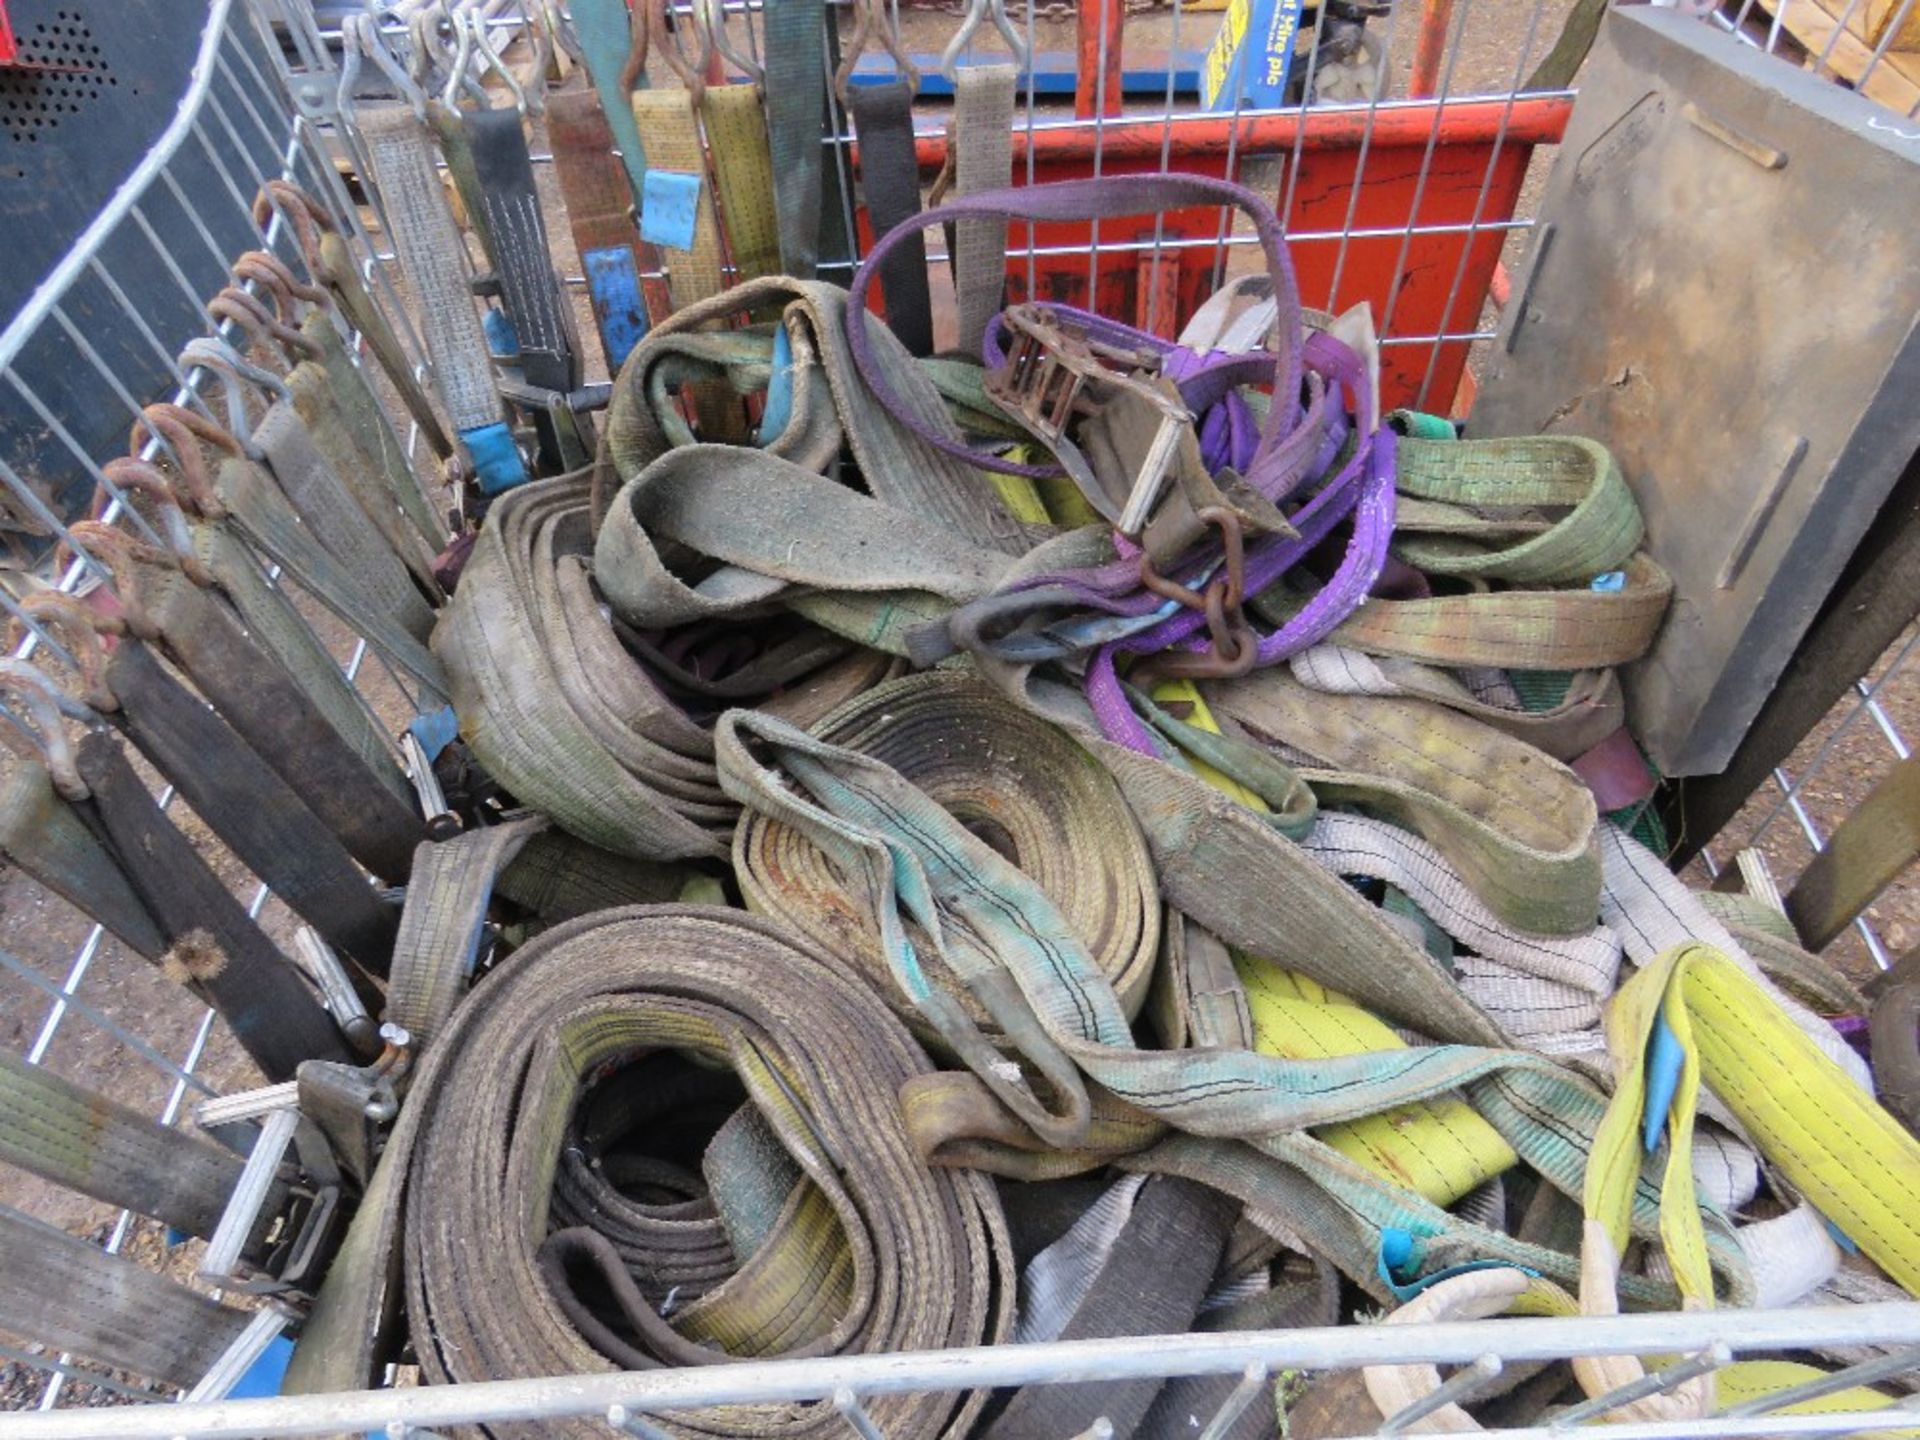 LARGE STILLAGE CONTAINING ASSORTED LIFTING STRAPS AND RATCHET STRAPS ETC.